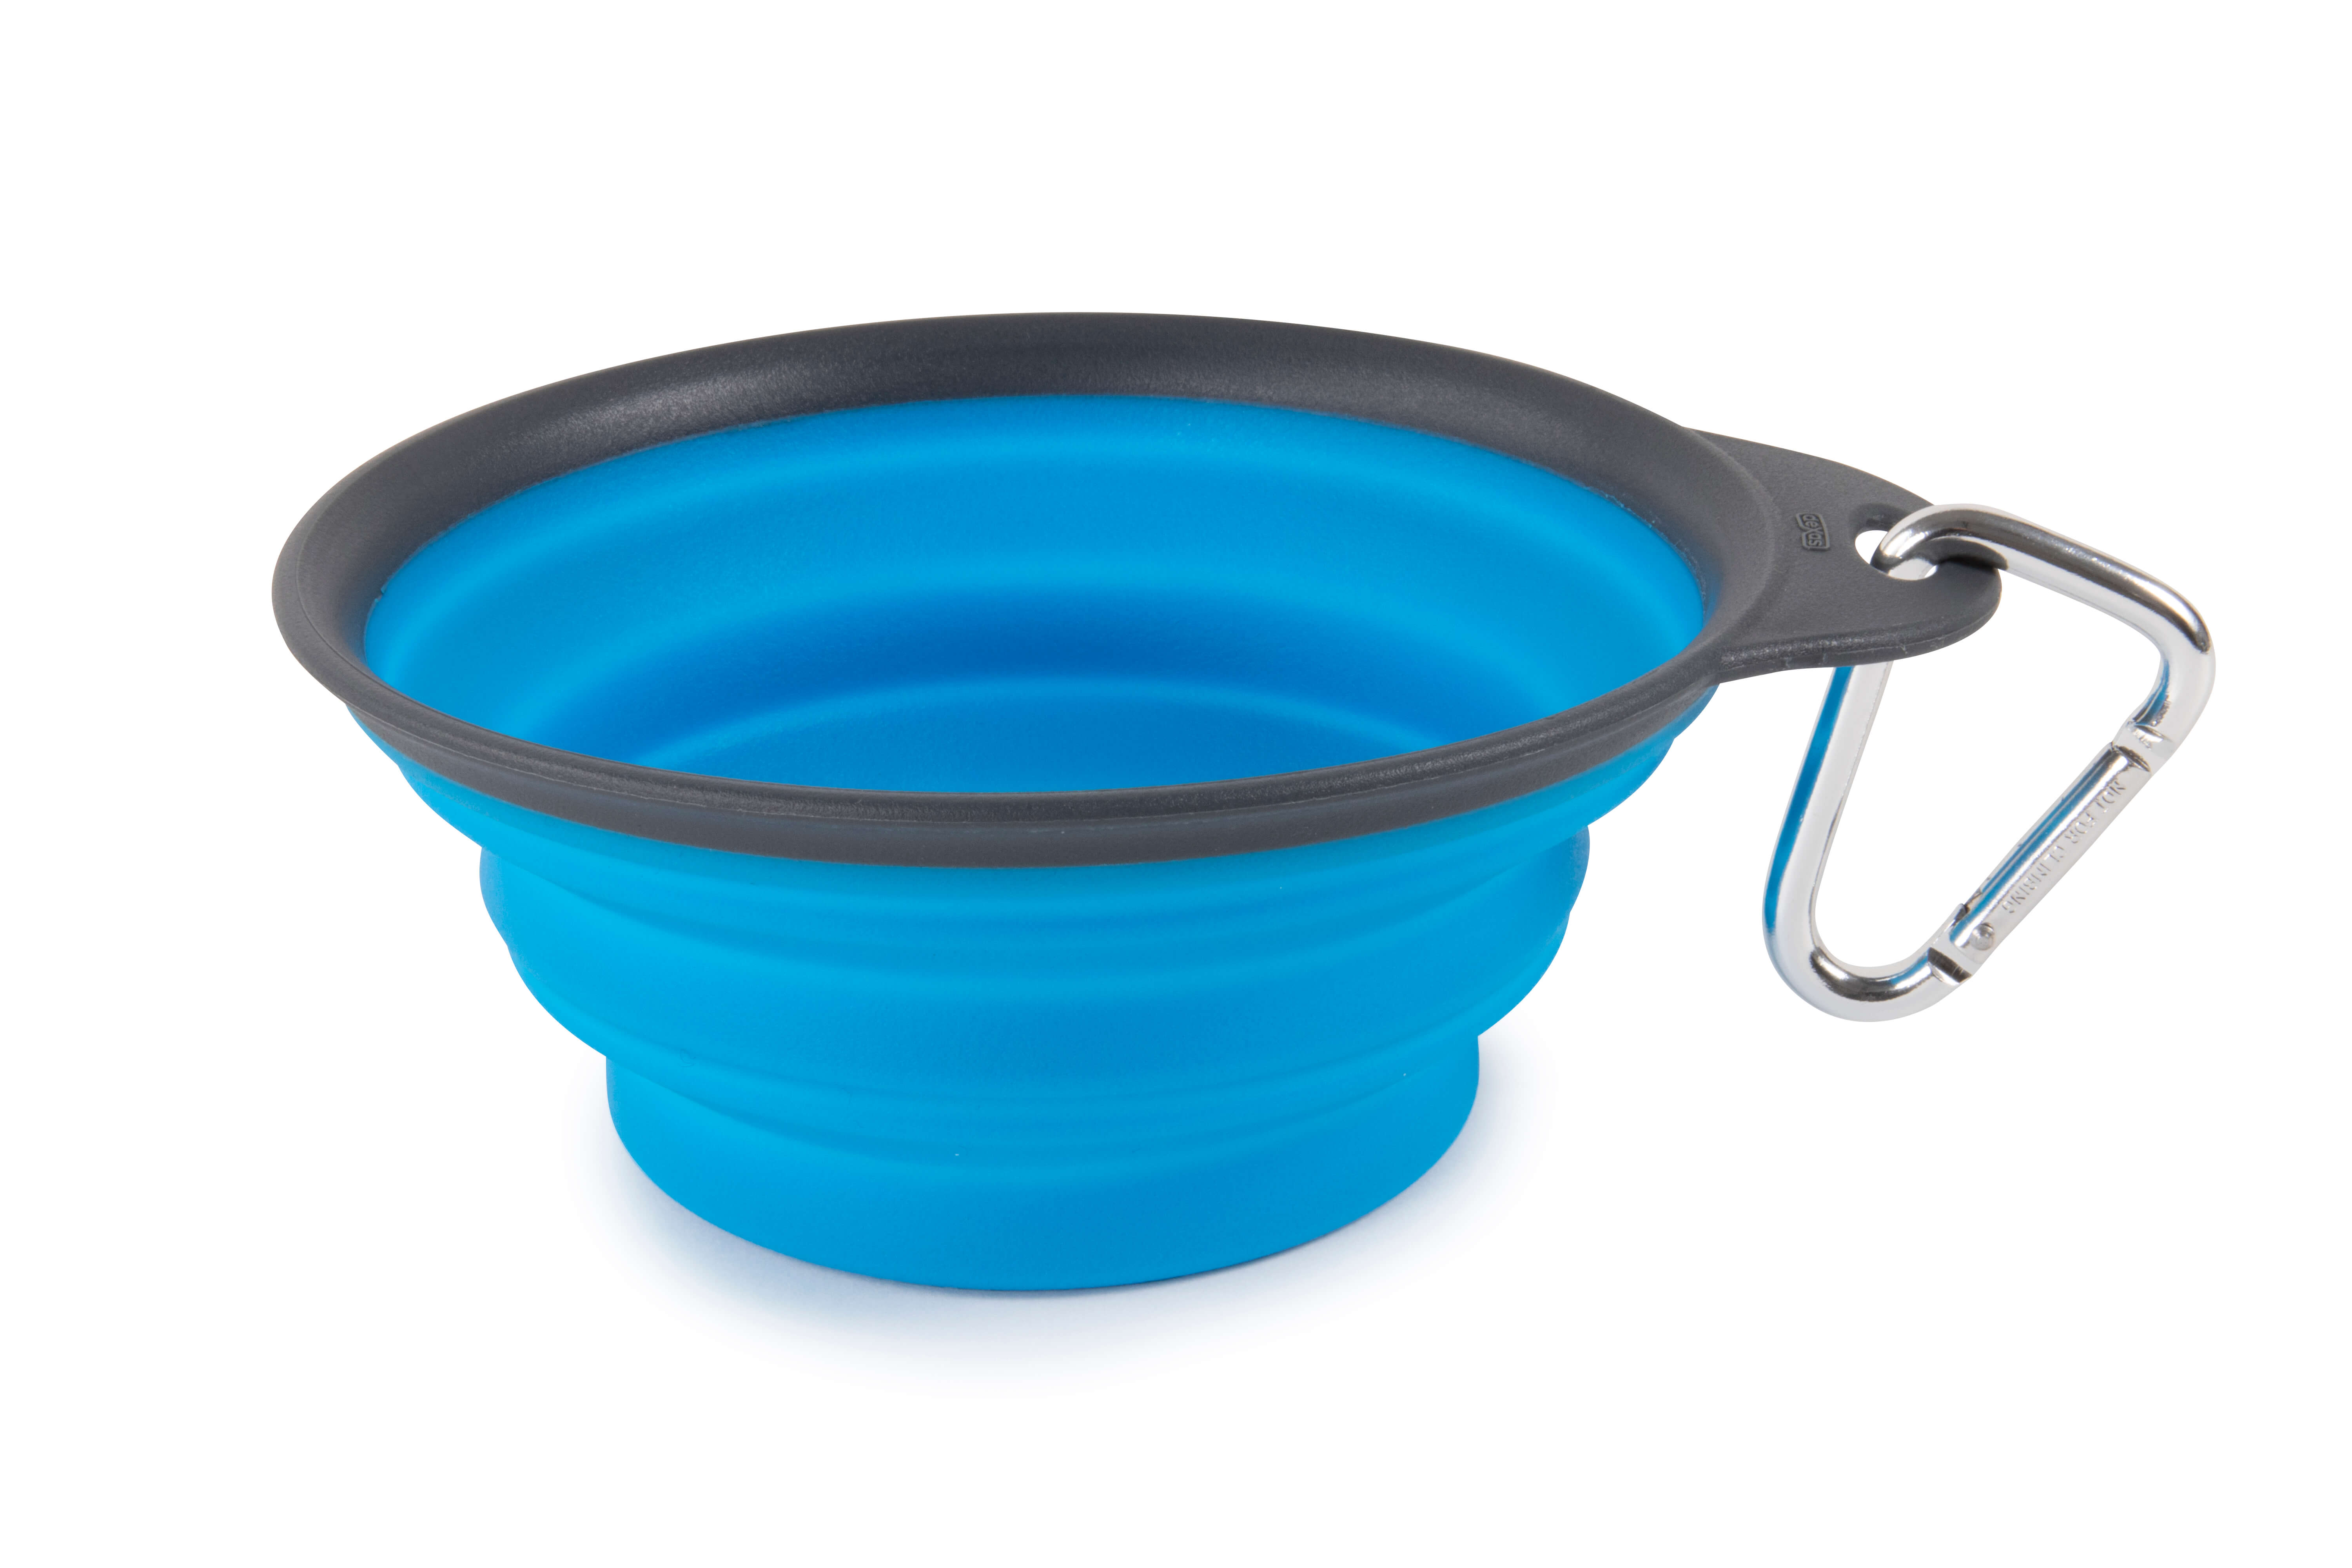 dexas travel bowl in blue for dogs side view